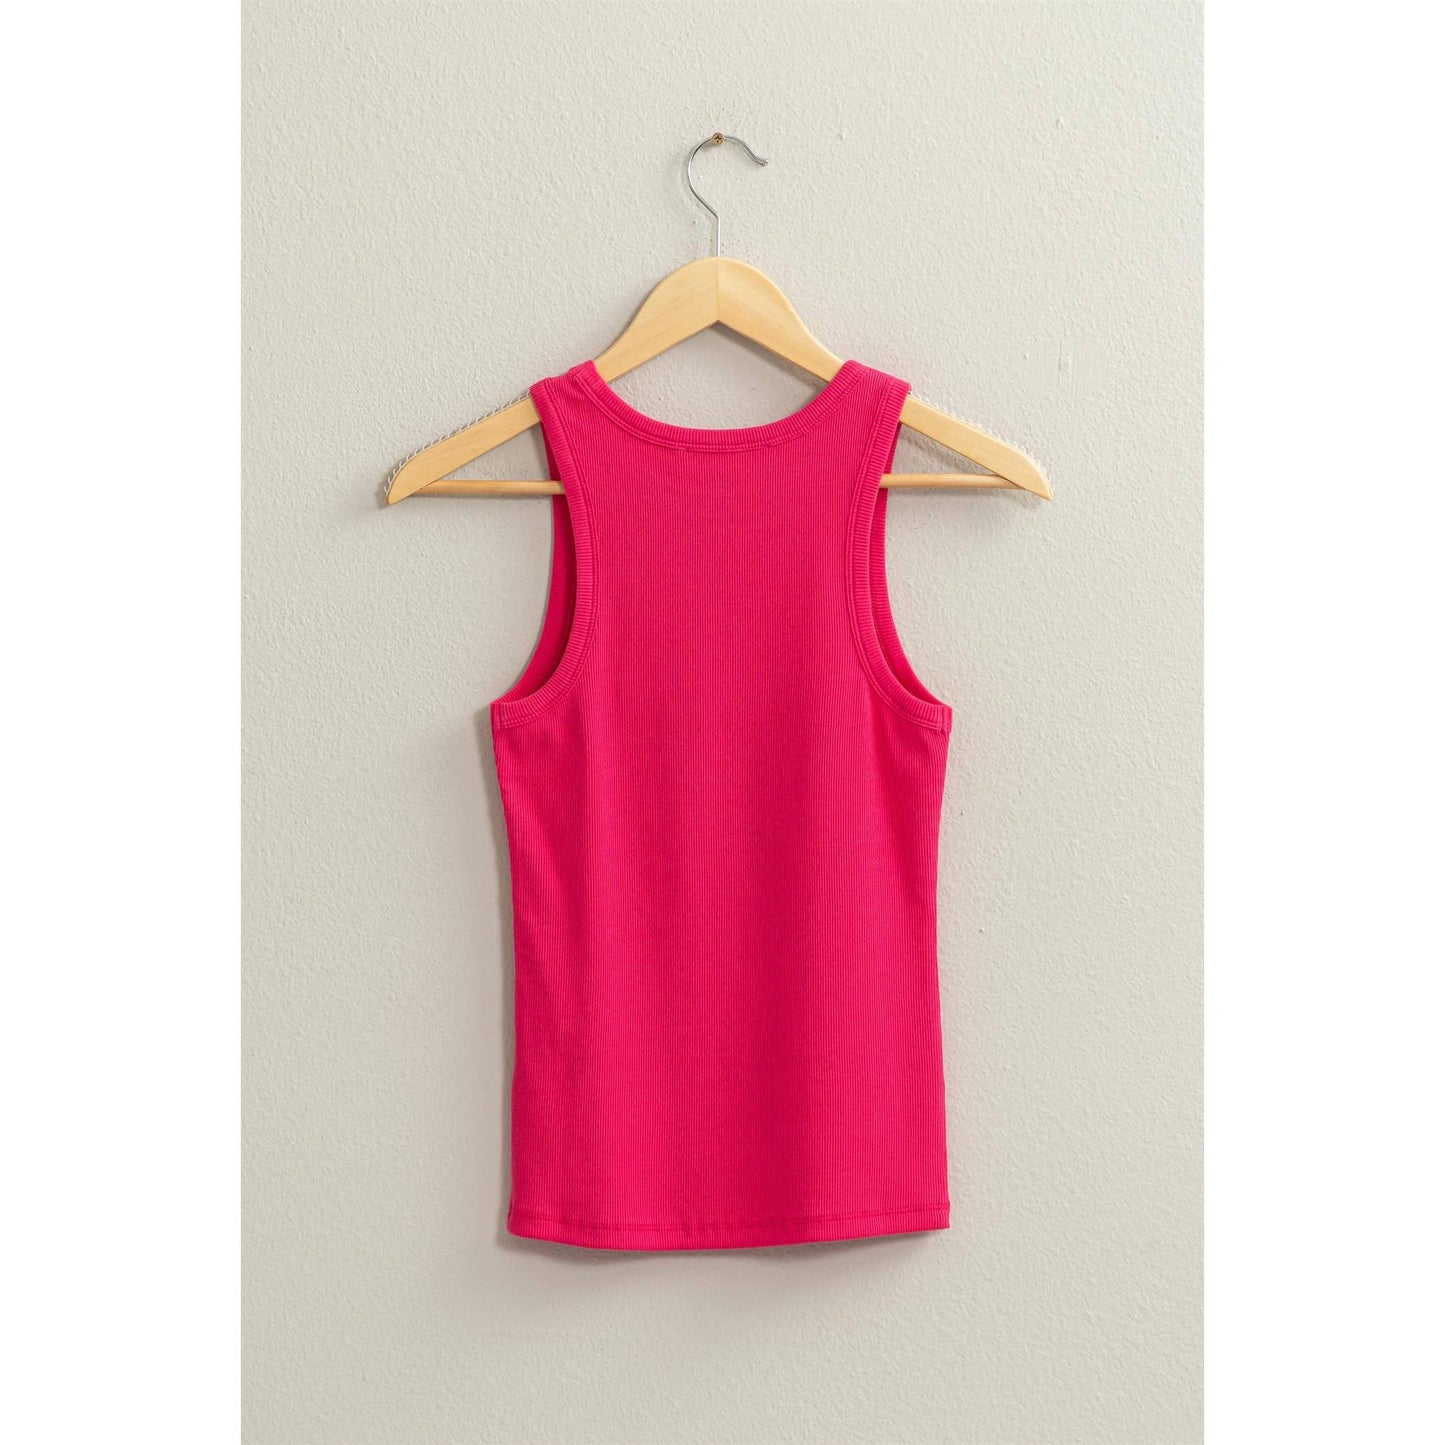 RIBBED ROUND NECK TANK TOP: